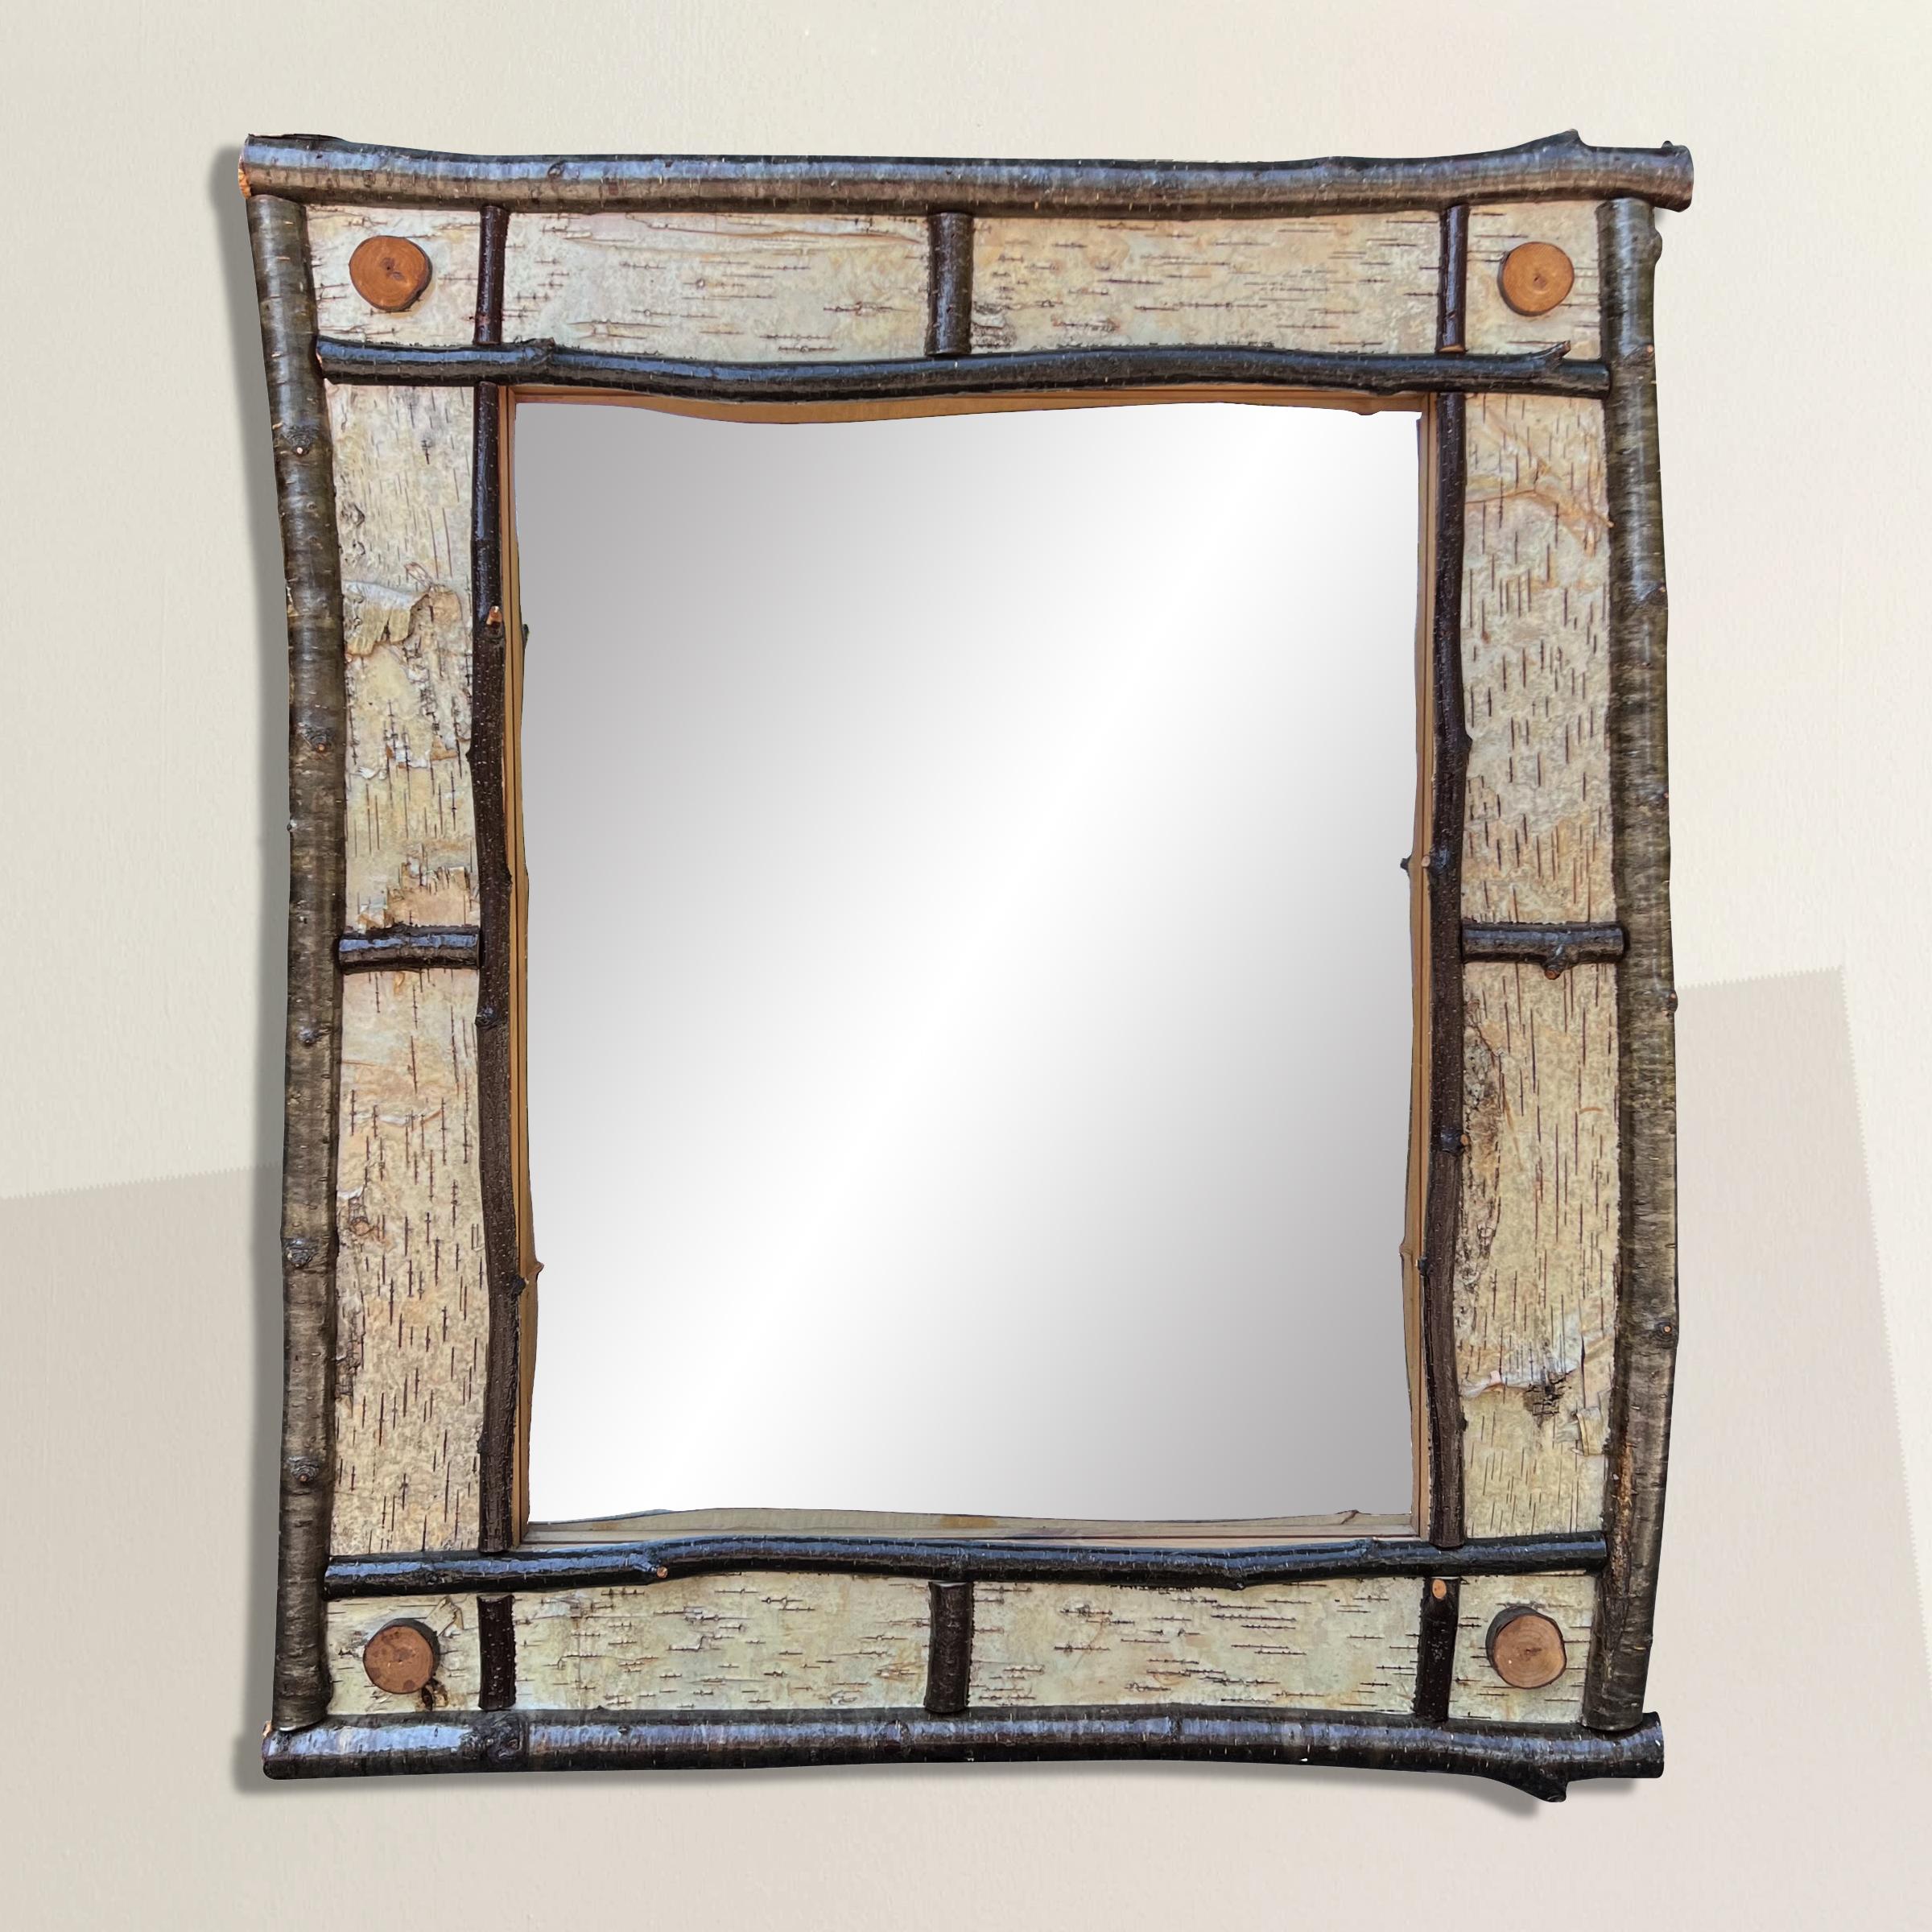 Step into a rustic reverie with this late 20th-century American Adirondack-style mirror, beautifully framed with birch bark and willow branches. Inspired by the iconic design aesthetic that emerged from the Adirondack Mountains in the 19th century,